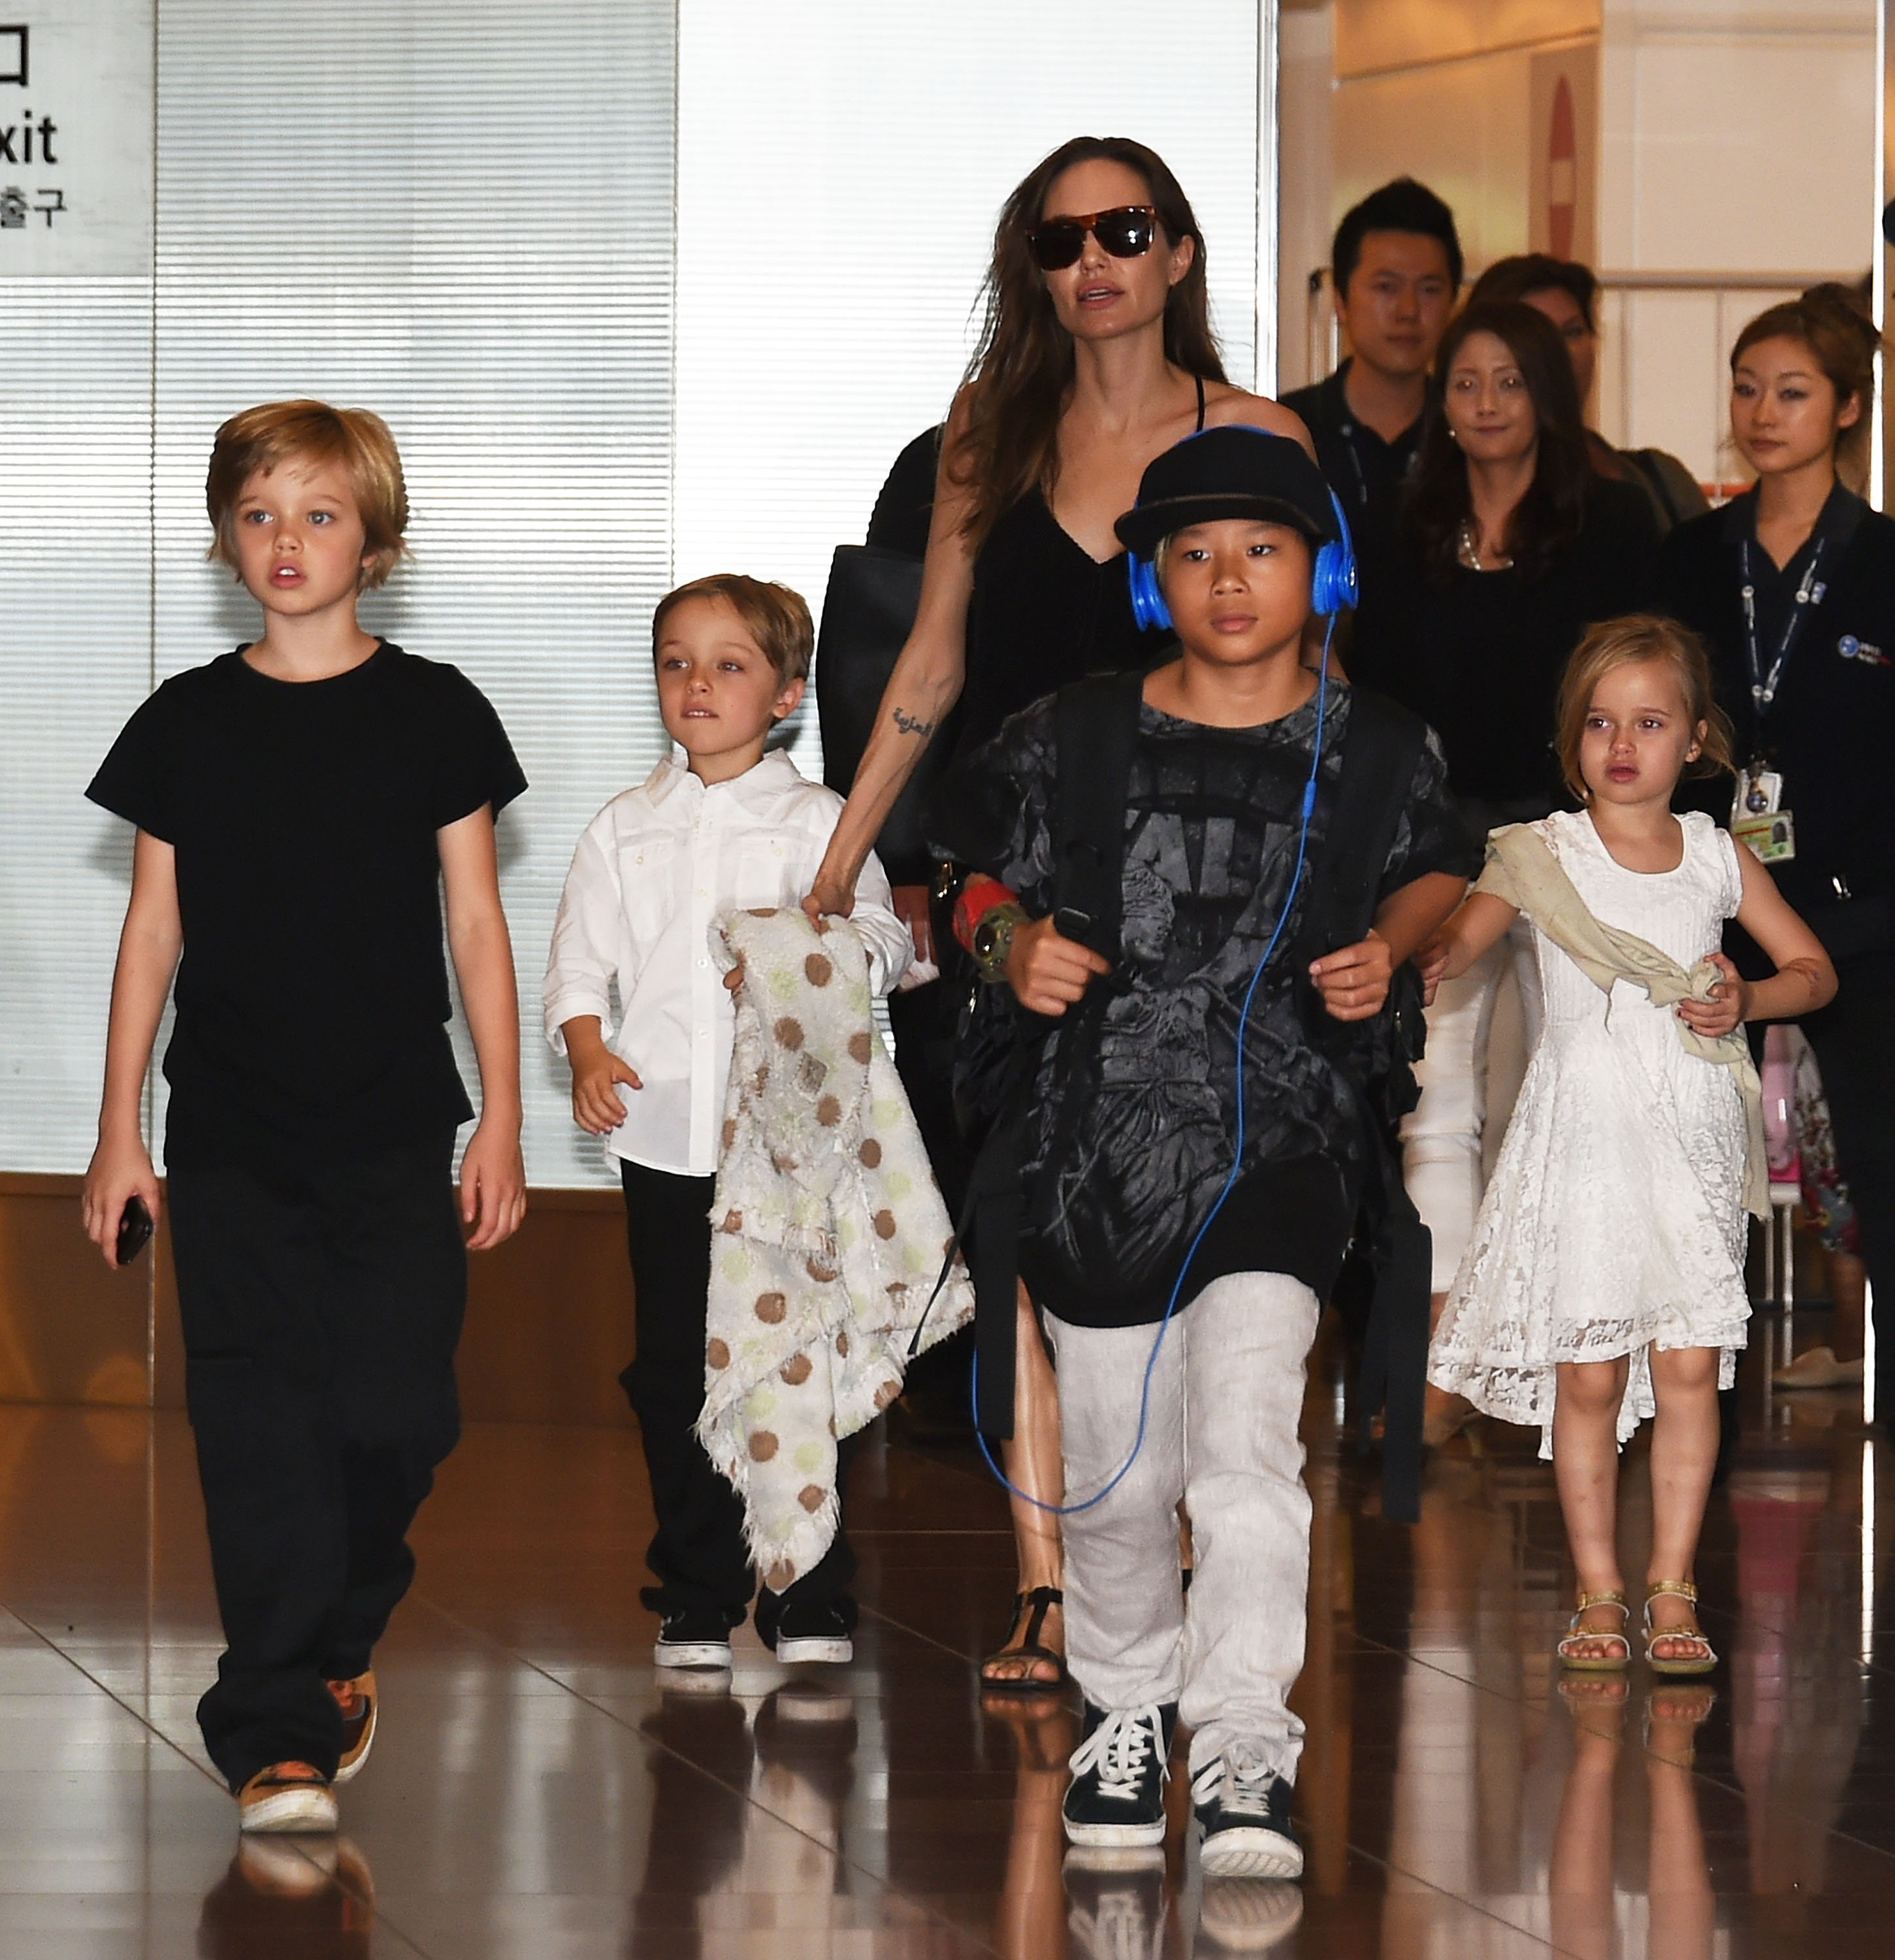 Shiloh Jolie-Pitt, Knox Jolie-Pitt, Angelina Jolie, Pax Jolie-Pitt and Vivienne Jolie-Pitt are seen upon arrival at Haneda Airport on June 21, 2014 in Tokyo, Japan. | Source: Getty Images